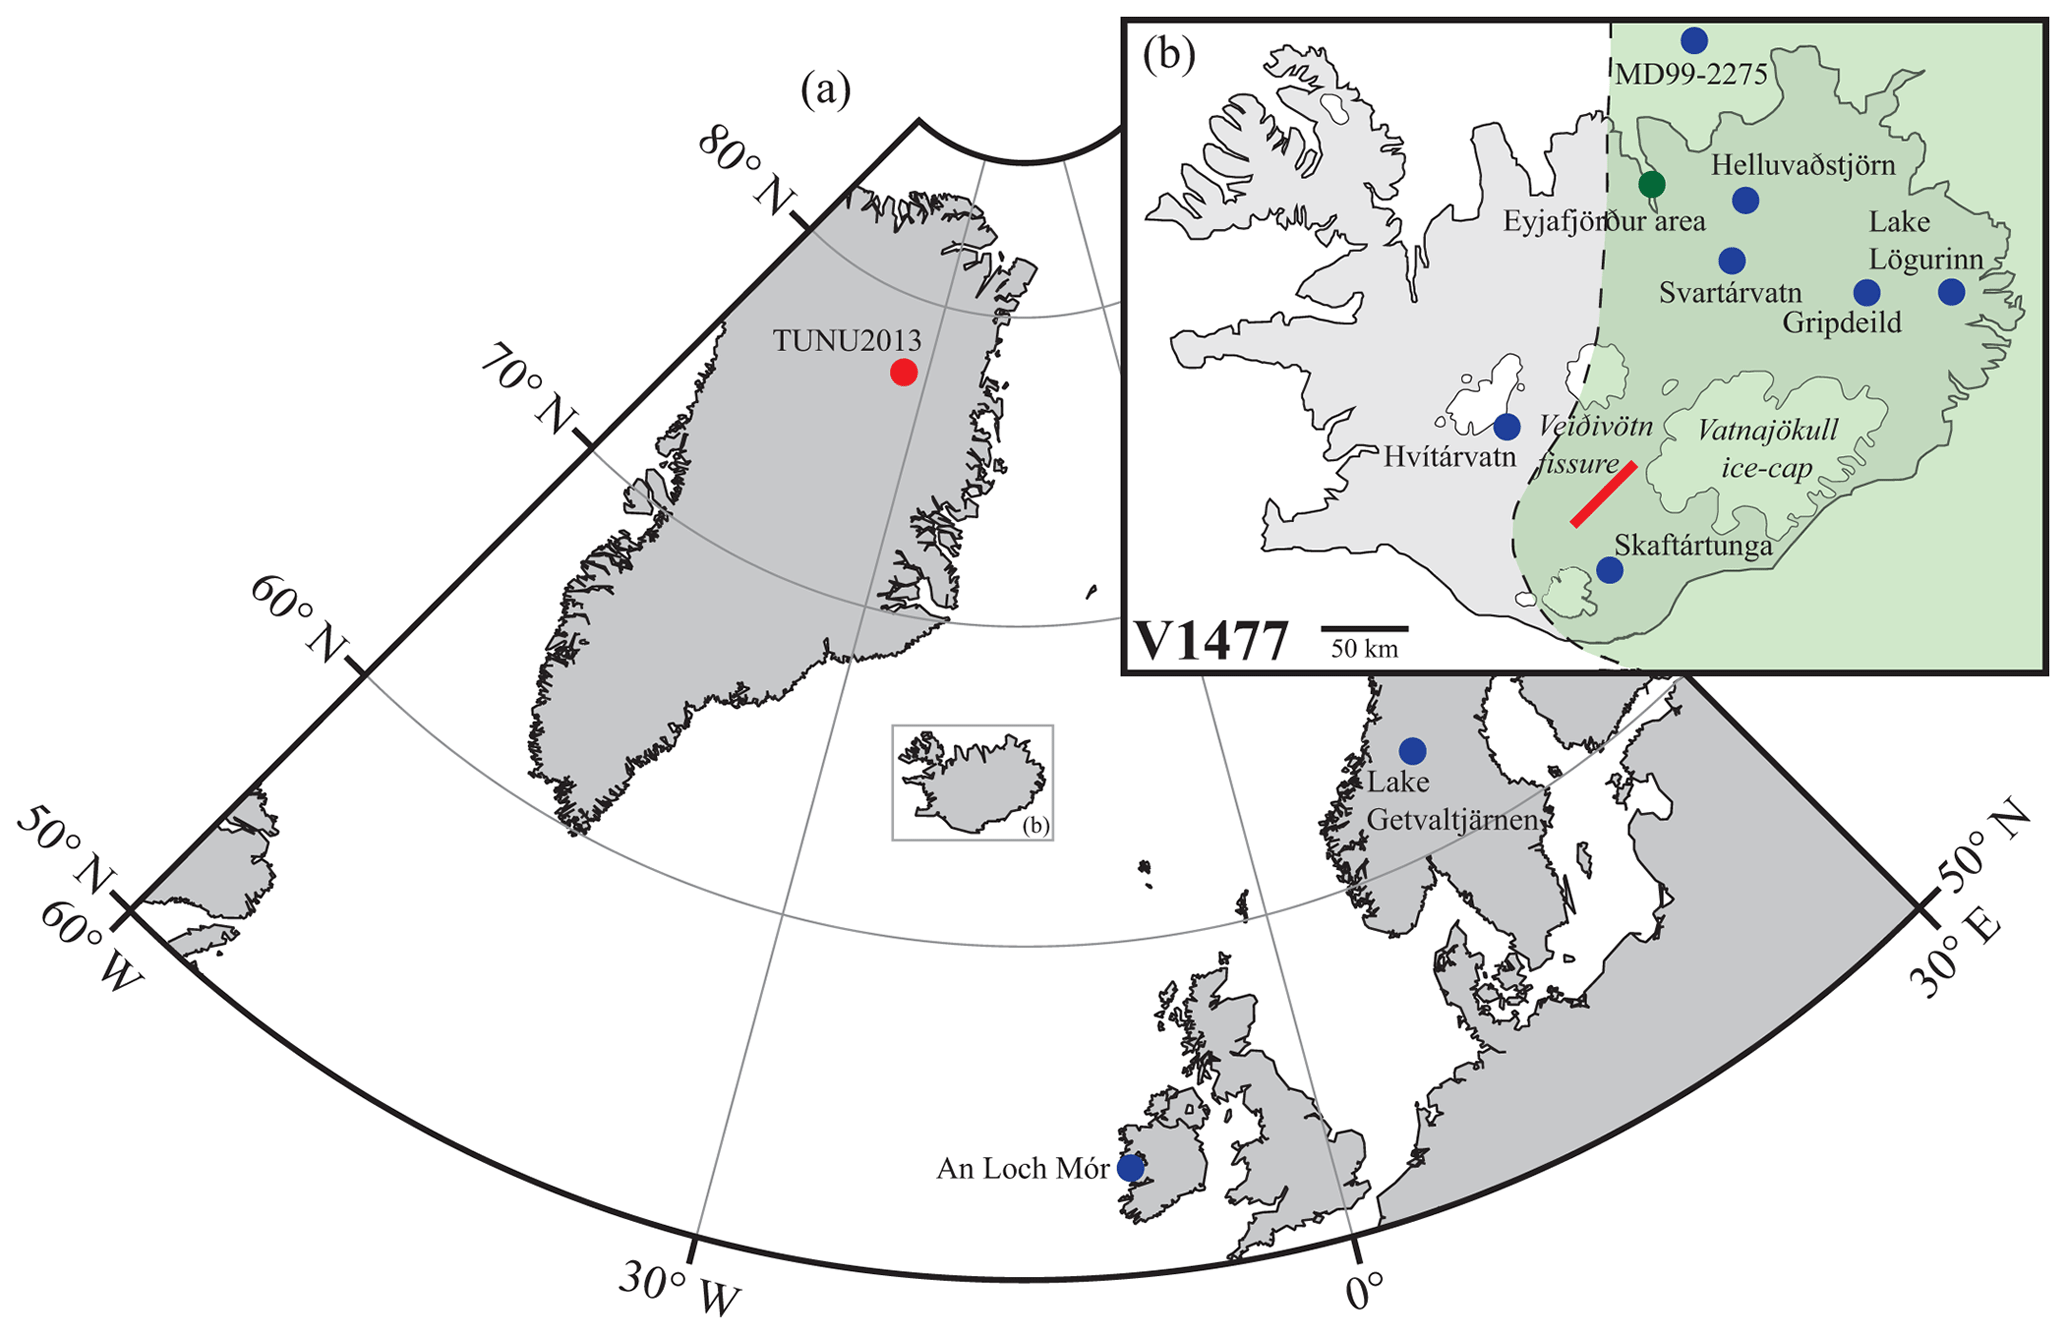 CP - Cryptotephra from the Icelandic Vei\u00f0iv\u00f6tn 1477 CE eruption in a Greenland ice core ...